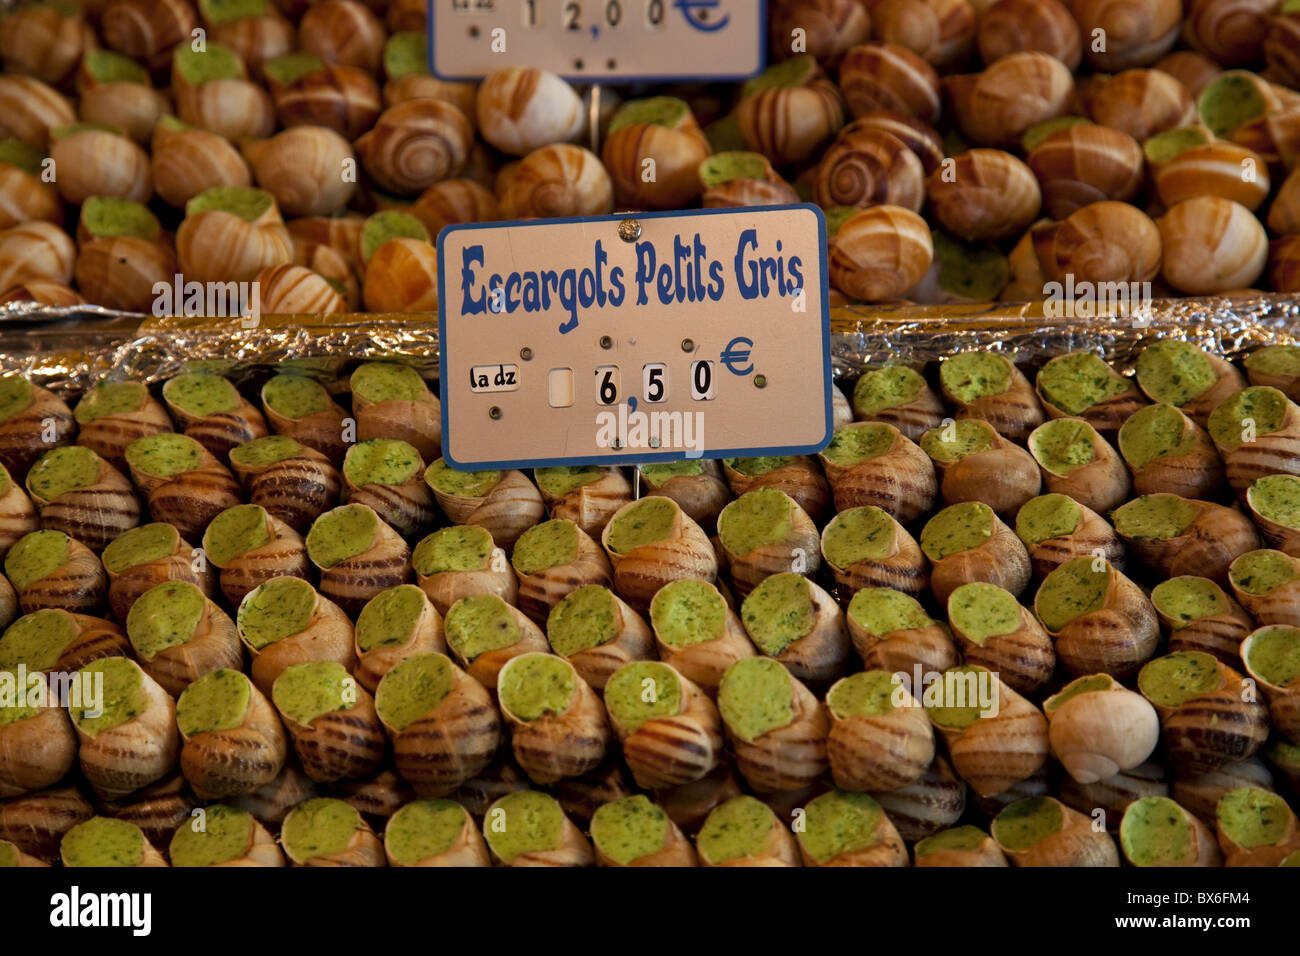 Escargot (edible land snails) for sale at local market in Paris, France, Europe Stock Photo